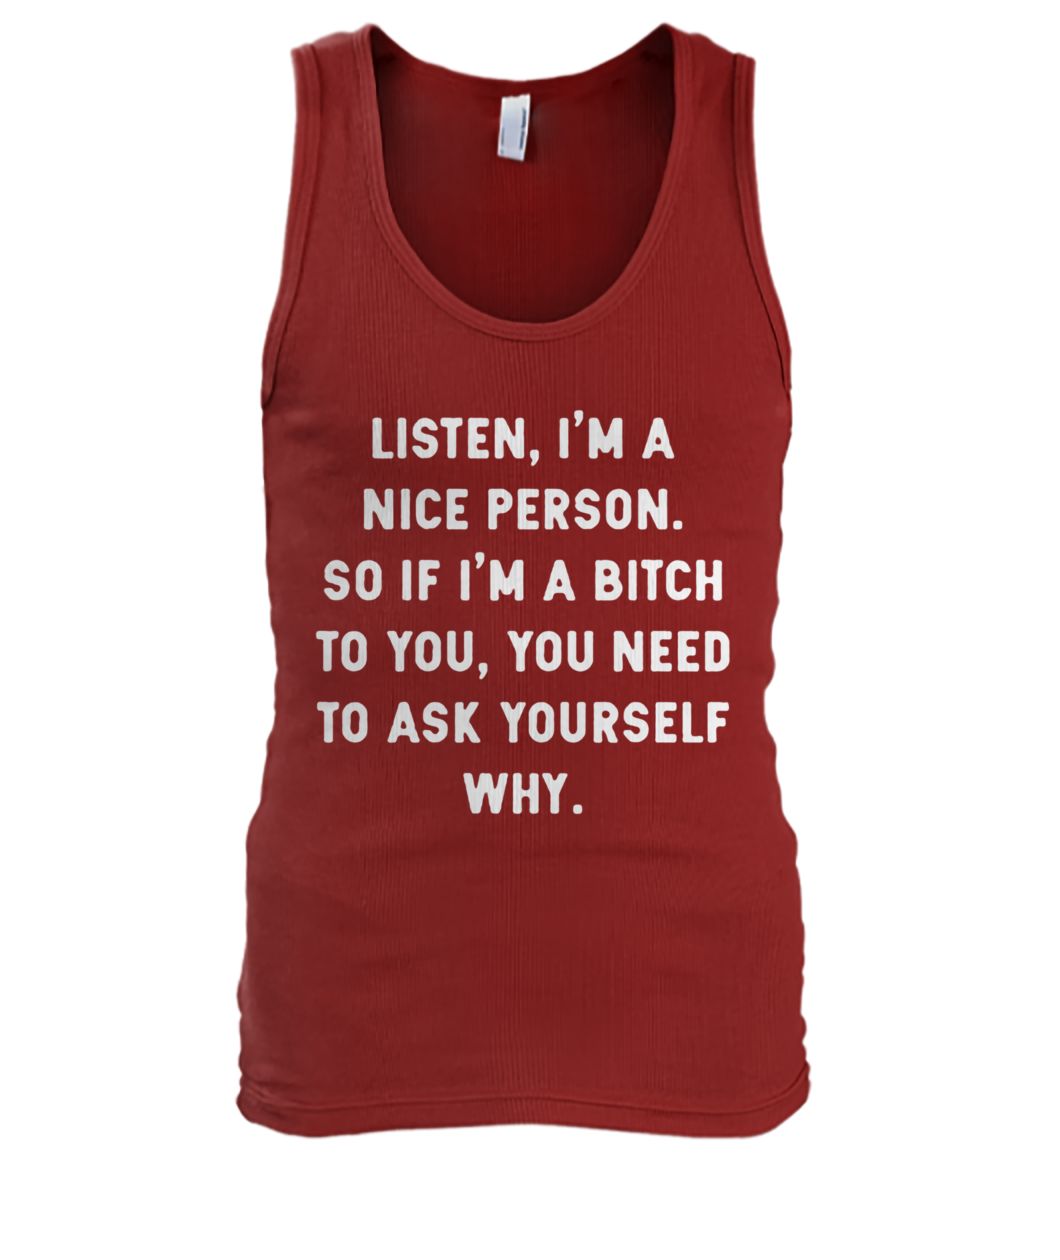 Listen I'm a nice person so if I'm a bitch to you you need to ask yourself why men's tank top